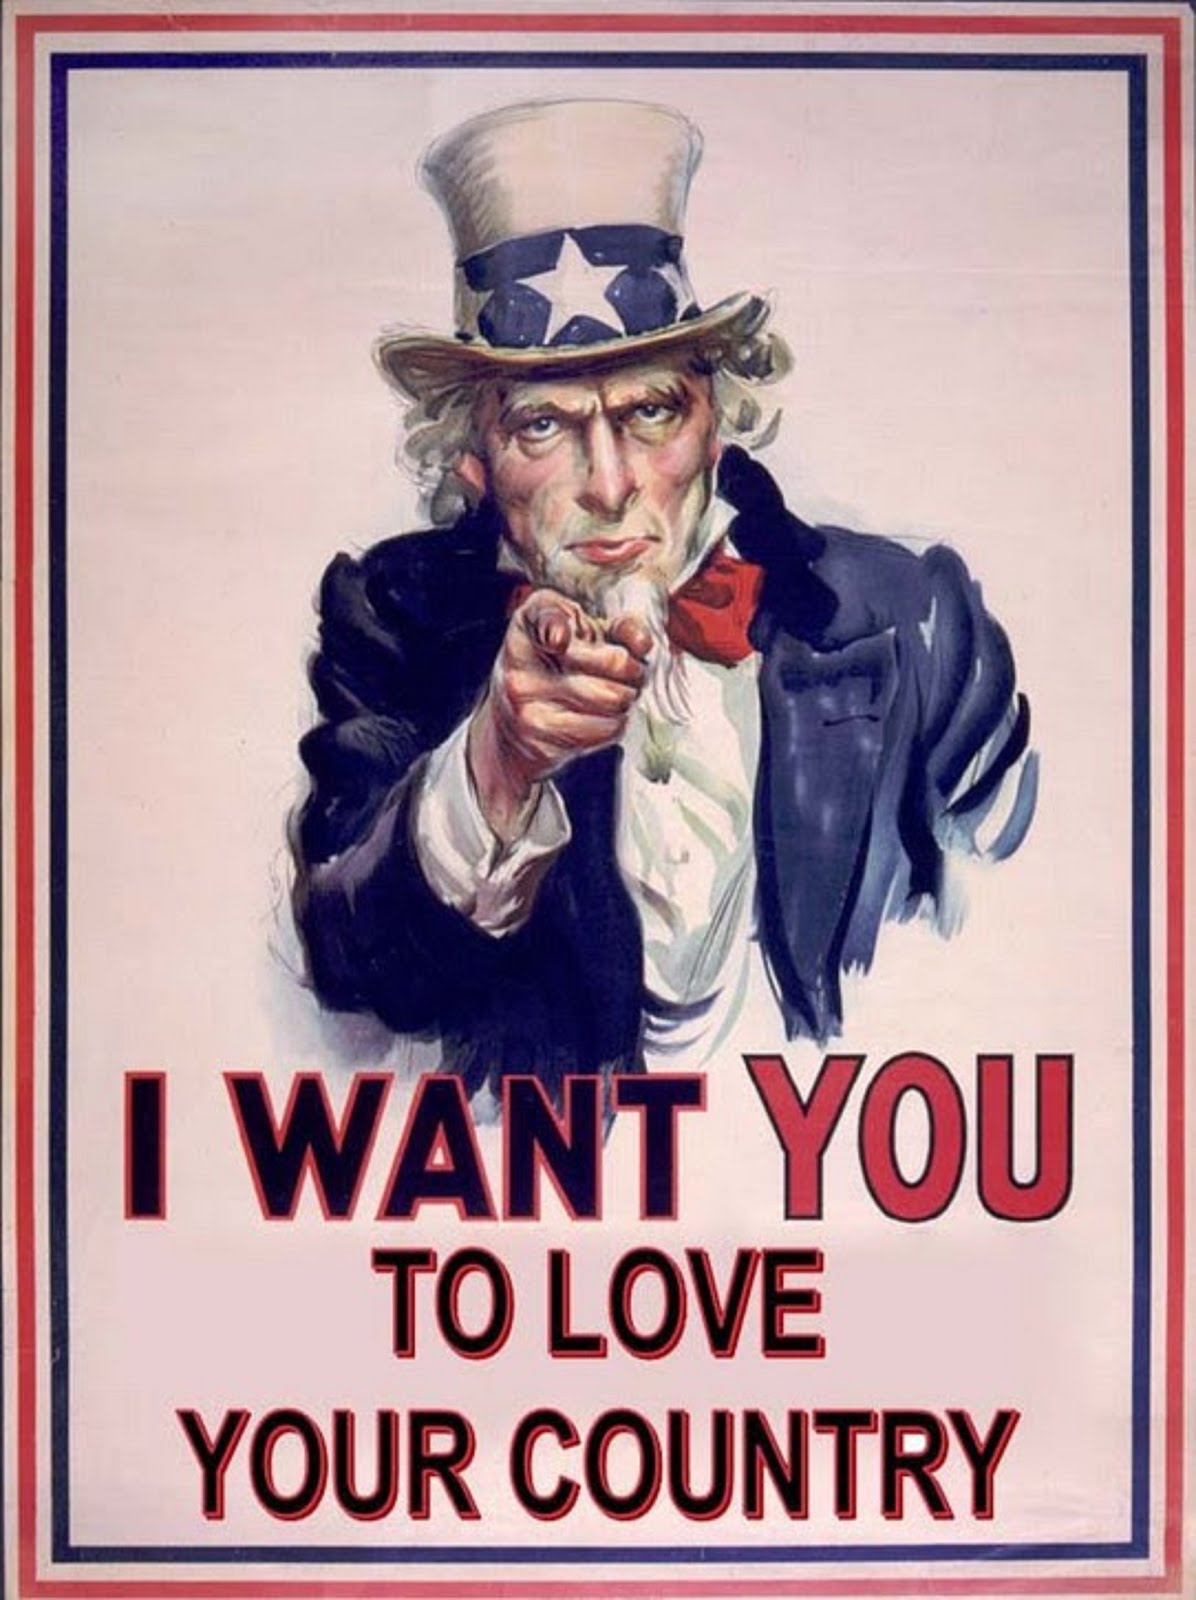 I WANT YOU TO LOVE YOUR COUNTRY